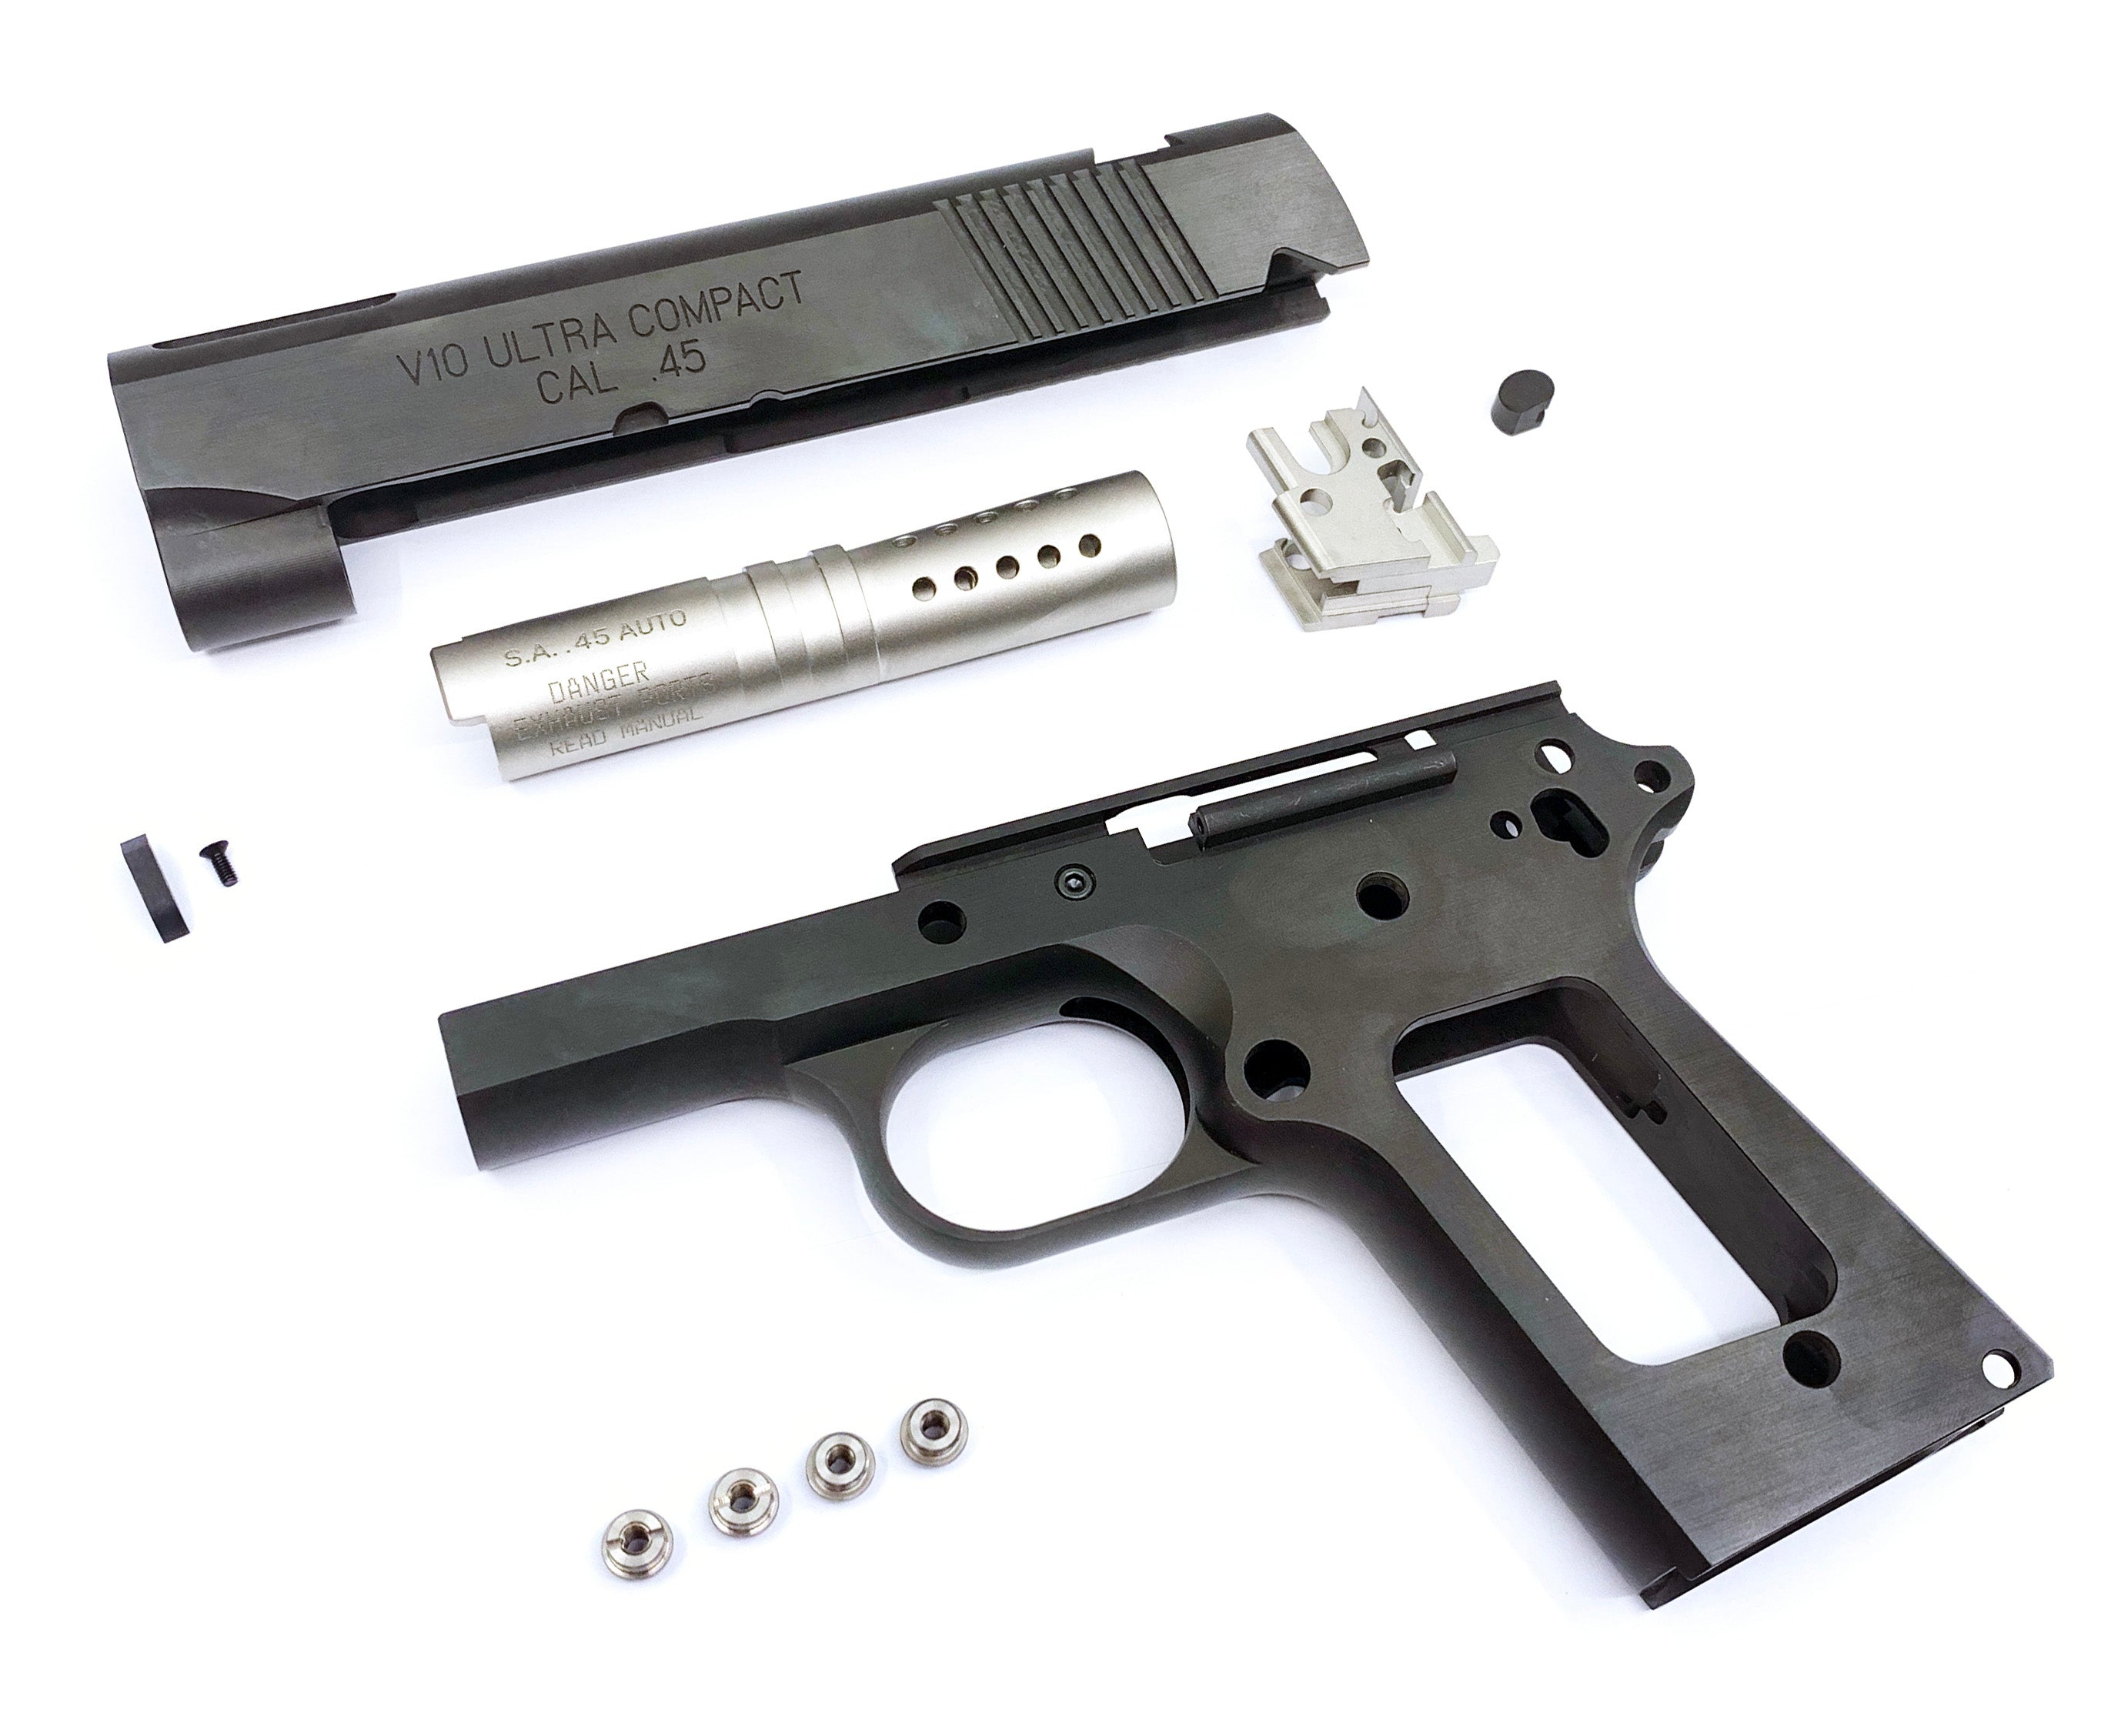 Pro-Arms SPR Style Stainless Steel Kit for Marui TM V10 GBBP Series (Black)